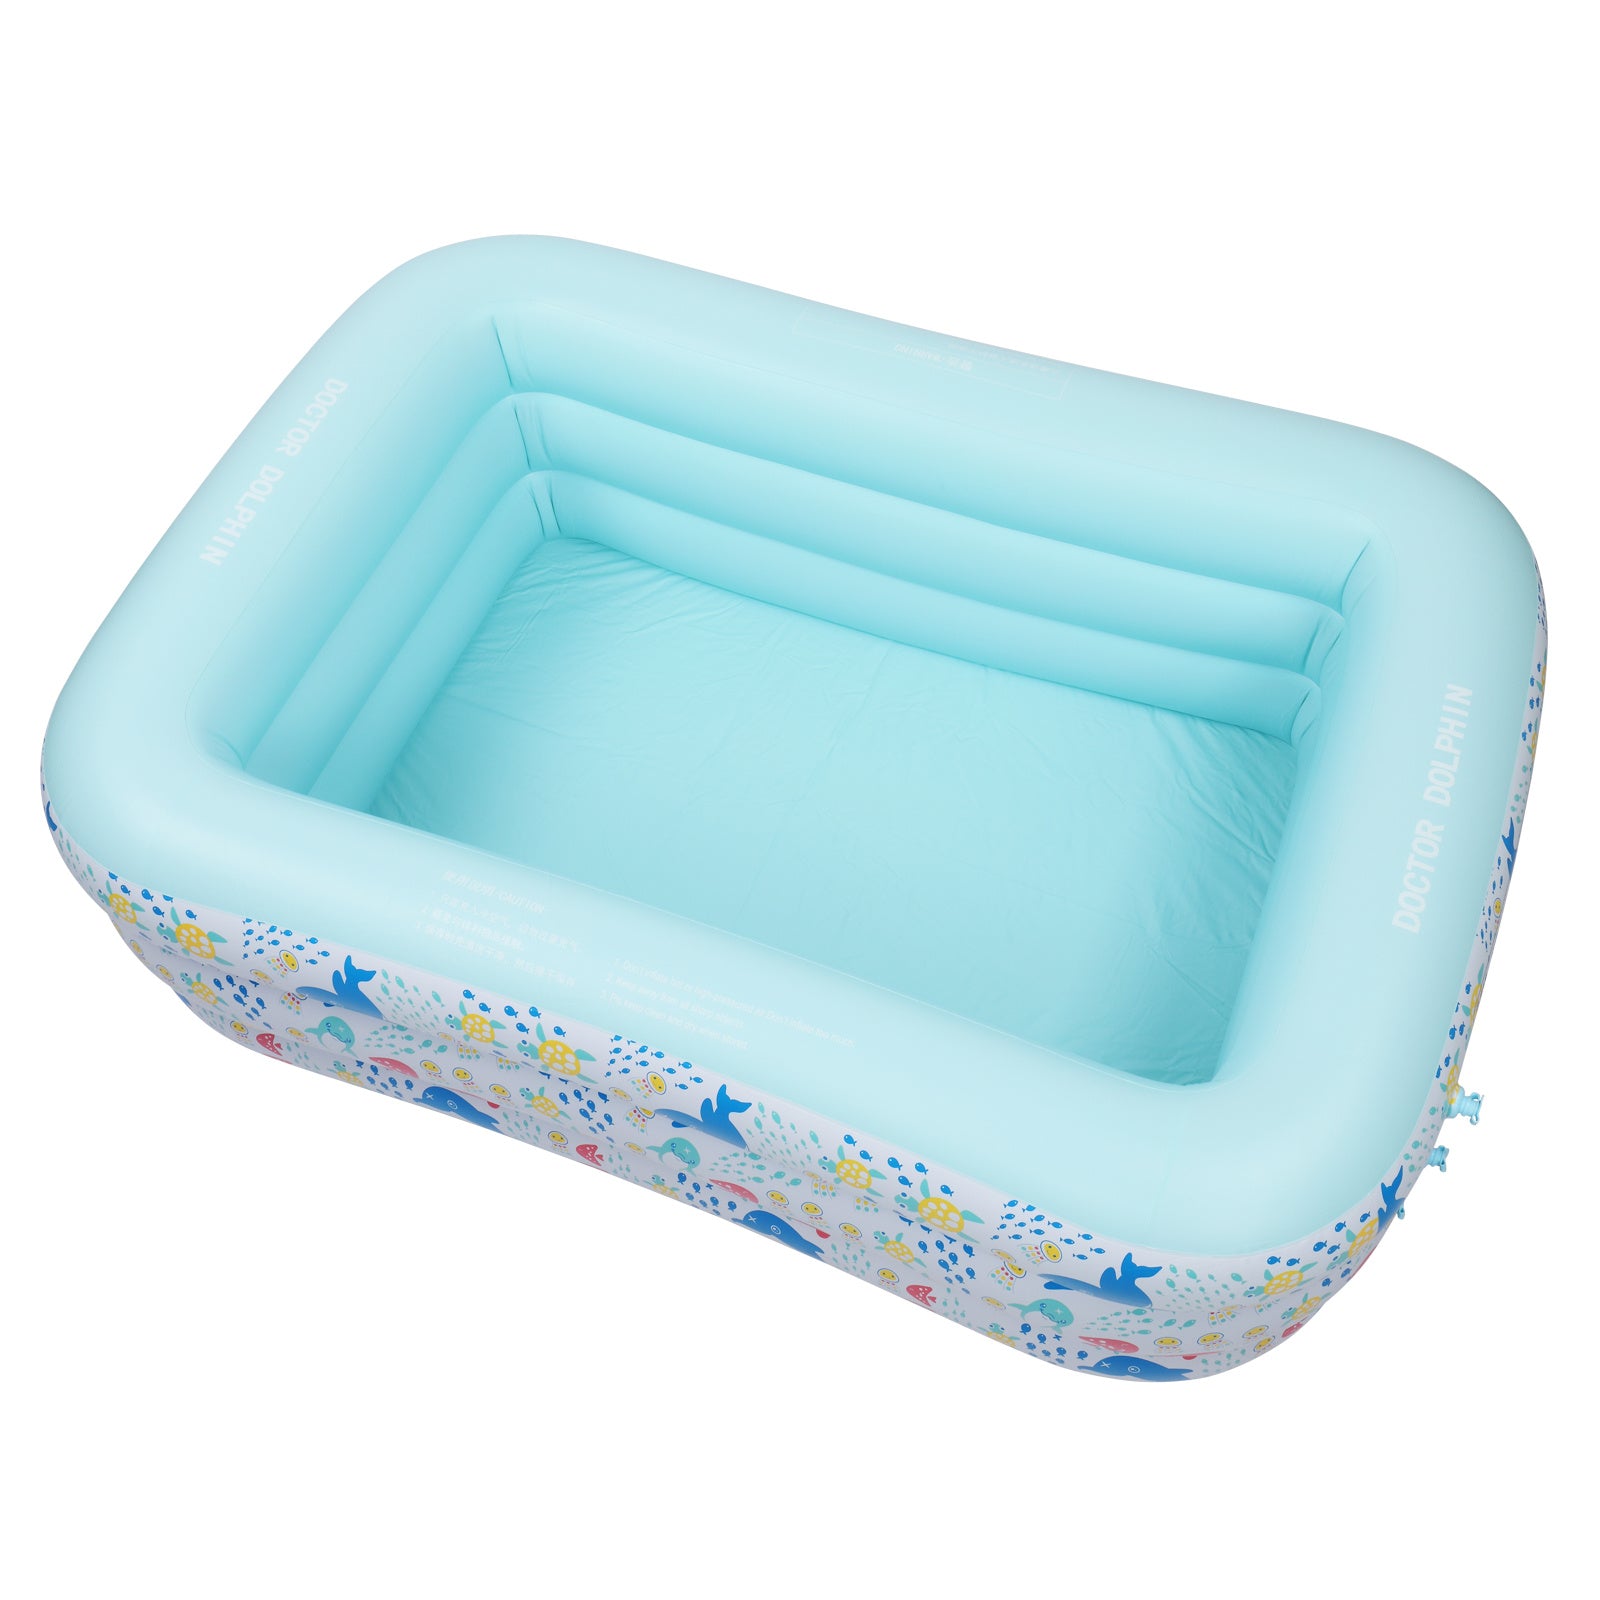 Inflatable Swimming Pool, Family Full-Sized Above Ground Swimming Pools,Inflatable Swim Pool for Kids, Indoor & Outdoor XH